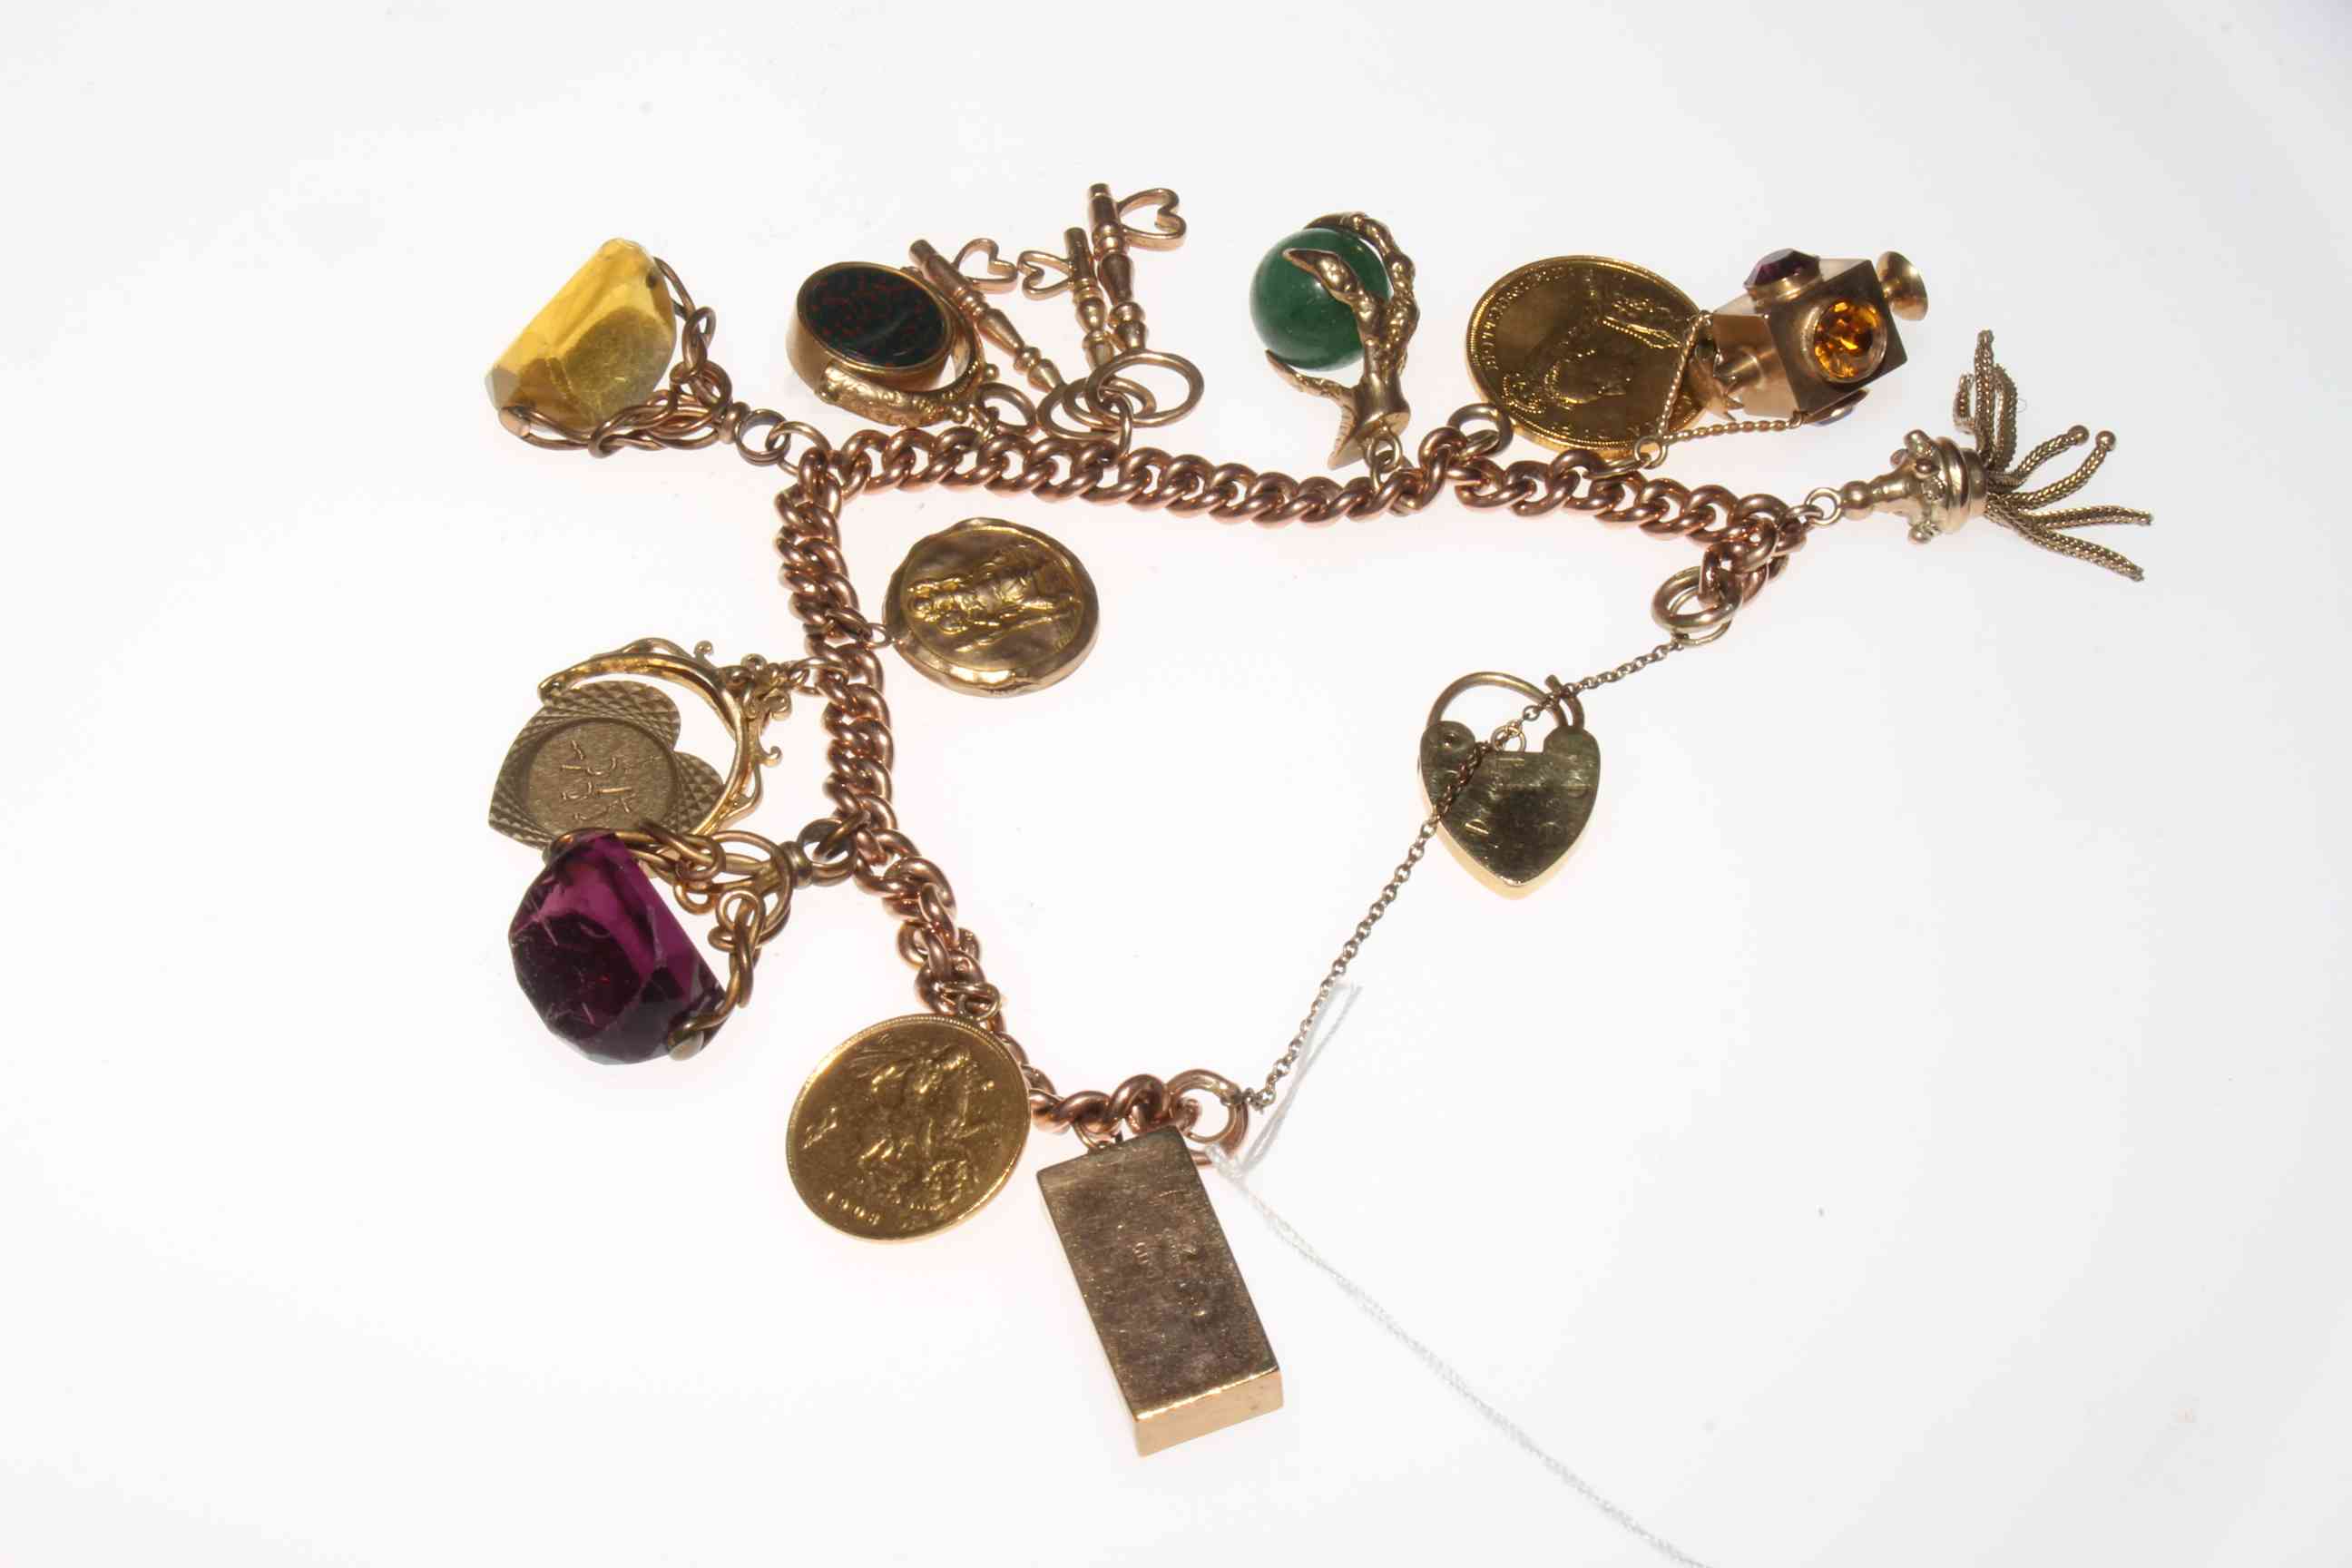 9 carat gold charm bracelet with twelve charms including 1887 sovereign and 1908 half sovereign.